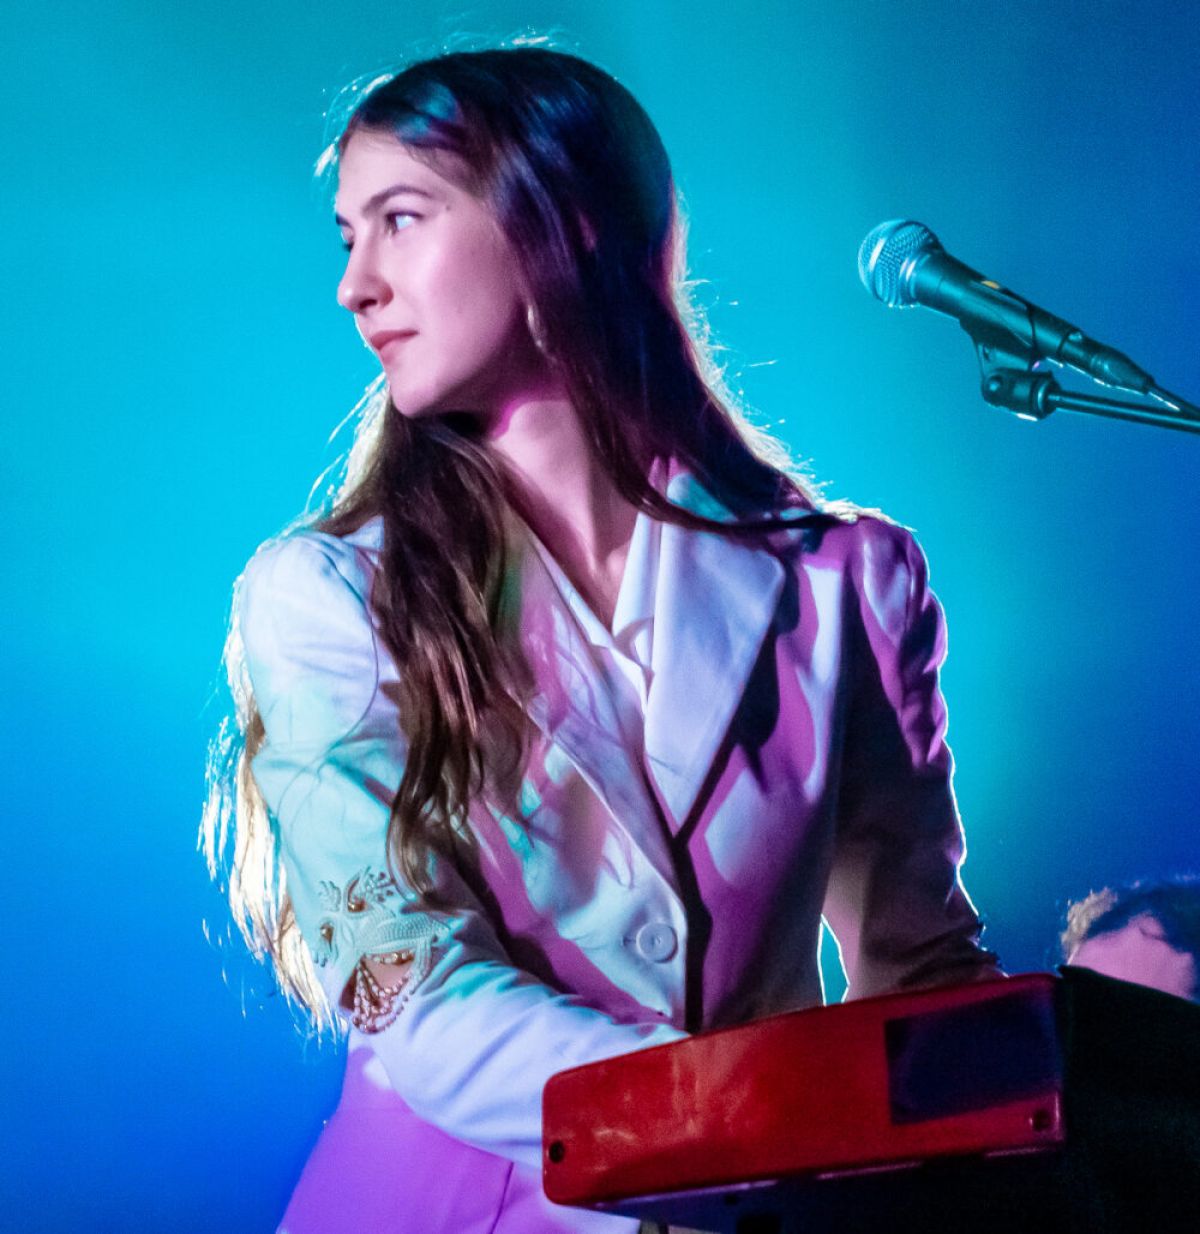 On ‘And In the Darkness, Hearts Aglow’ Weyes Blood shines